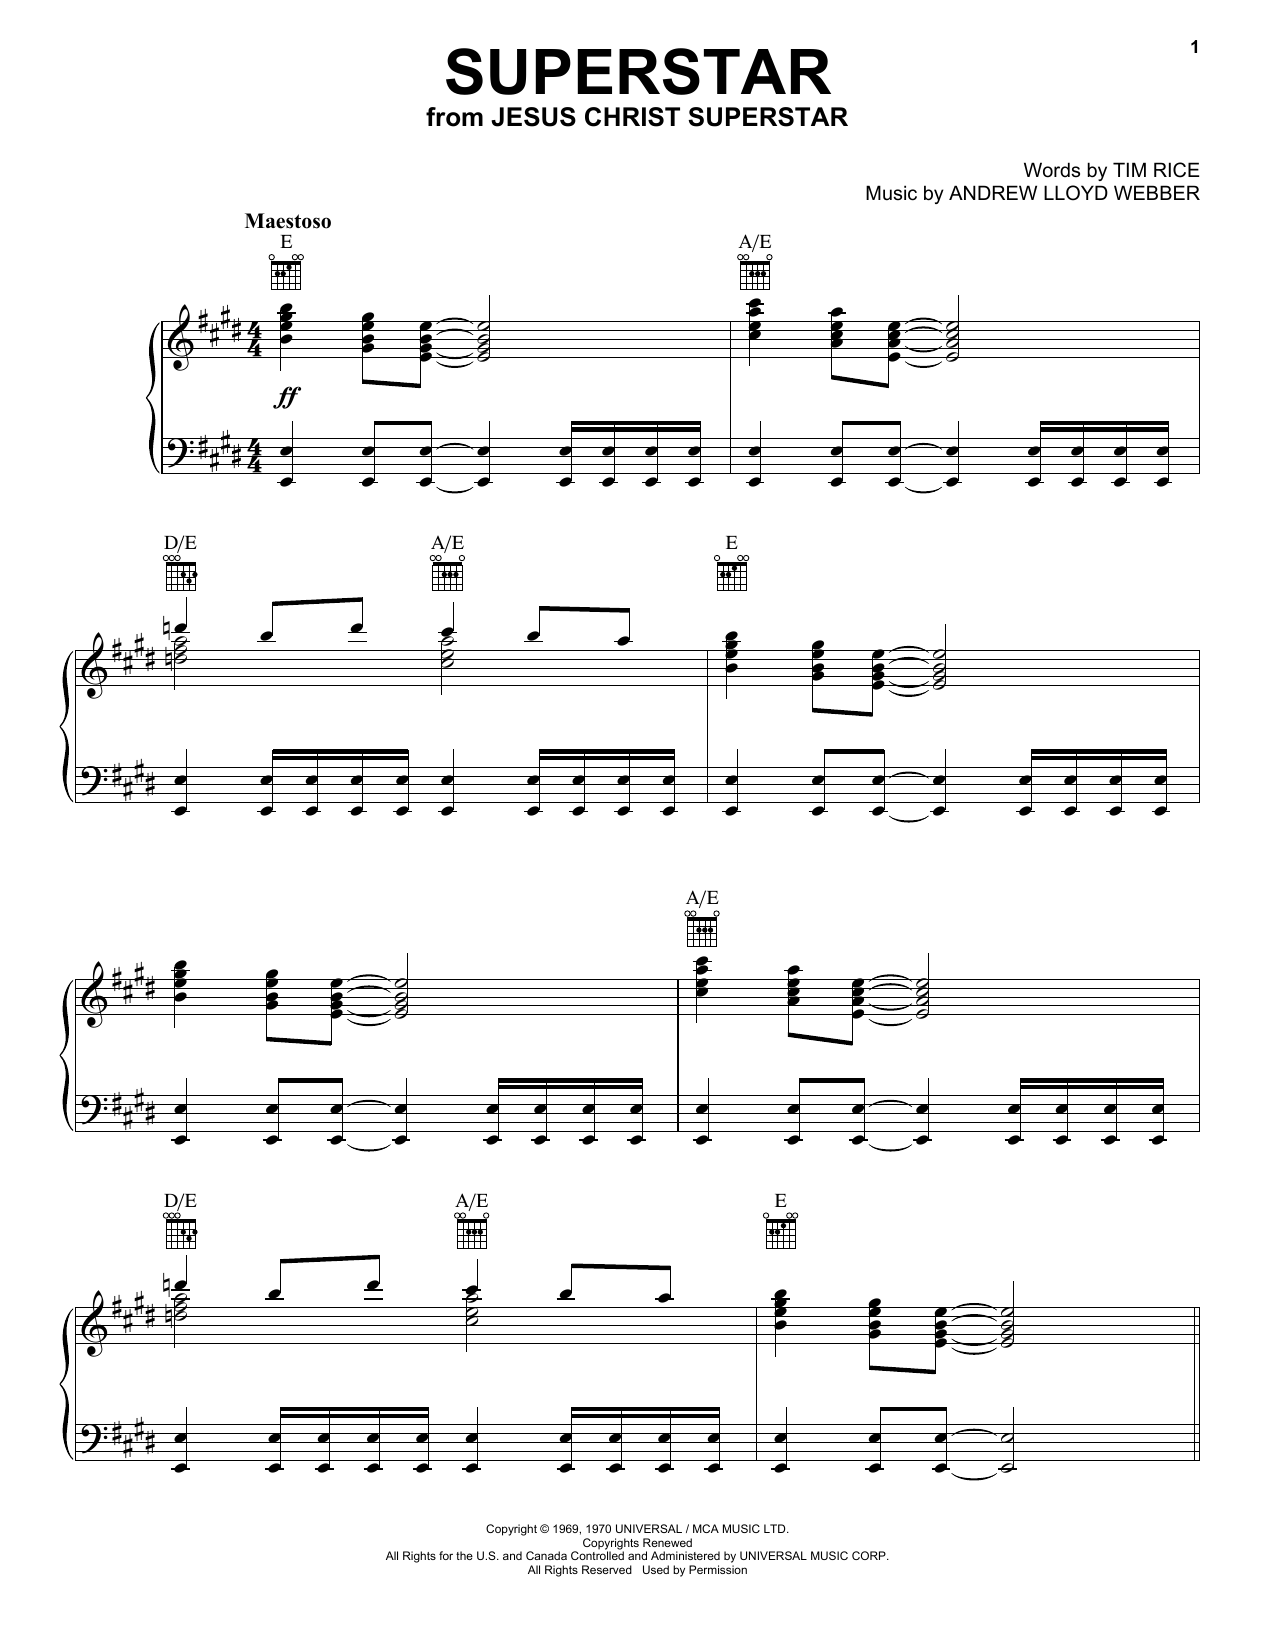 Andrew Lloyd Webber Superstar sheet music notes and chords. Download Printable PDF.